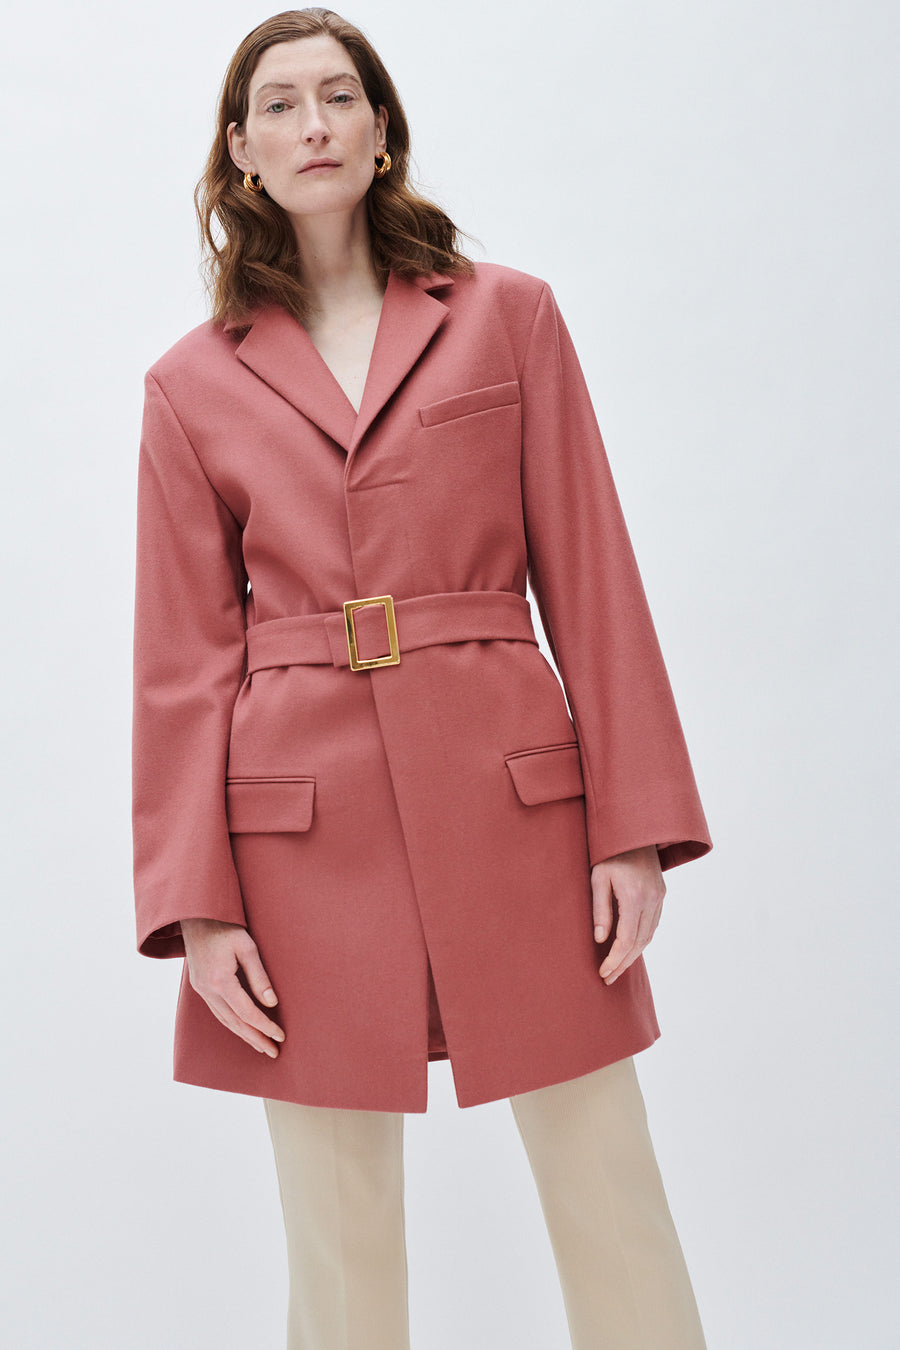 AQVAROSSA Asilah loden jacket in coral colour